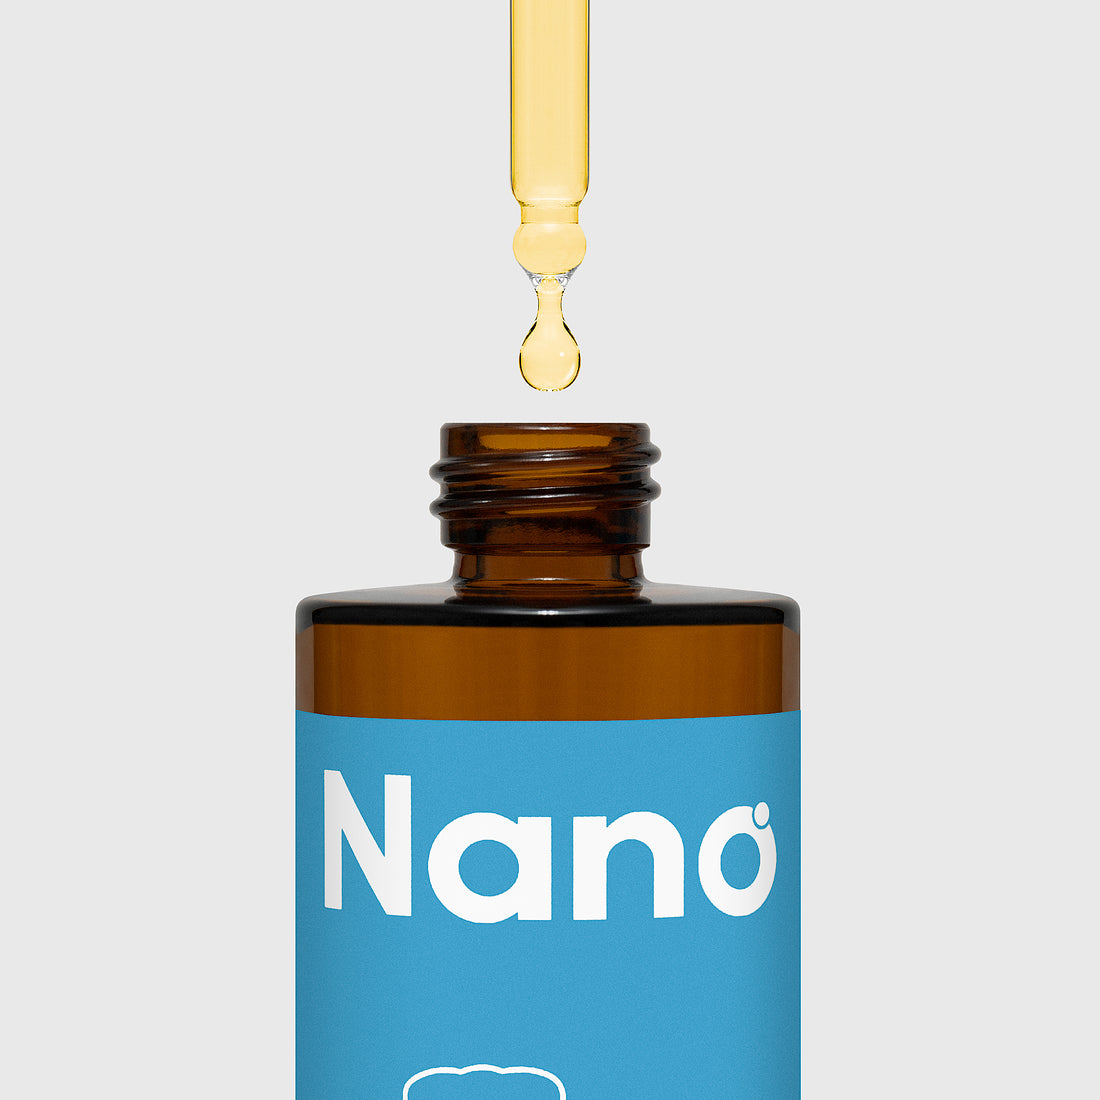 Nano bioavailable colloidal silver pet health and wellness supplement close up